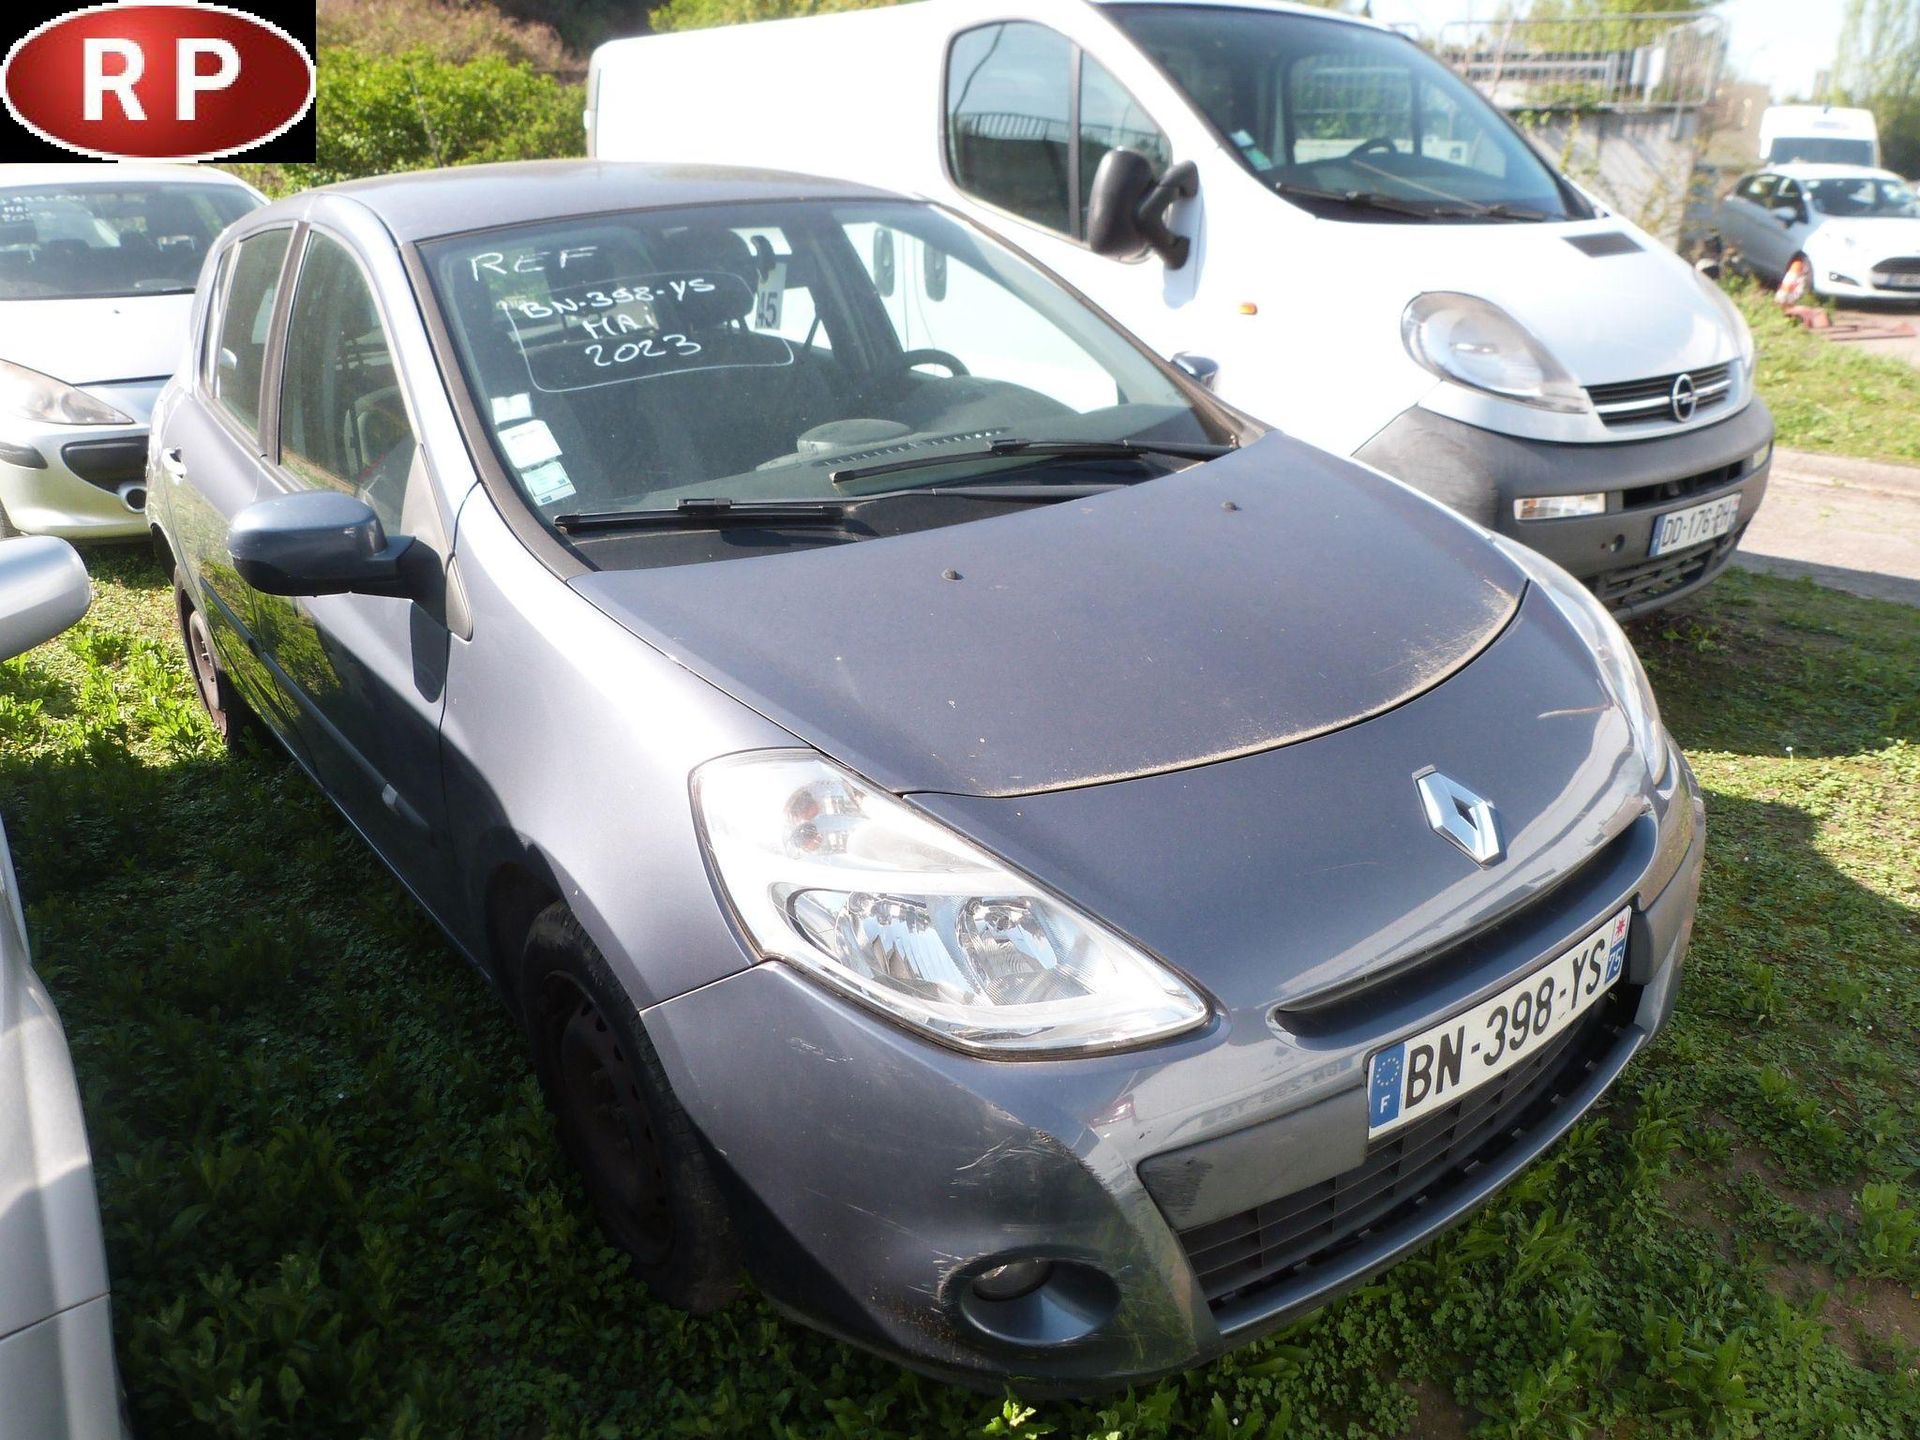 Null [RP] RENAULT Clio 1.2 i 75, Essence, imm. BN-398-YS, type M10RENVP003A579, &hellip;